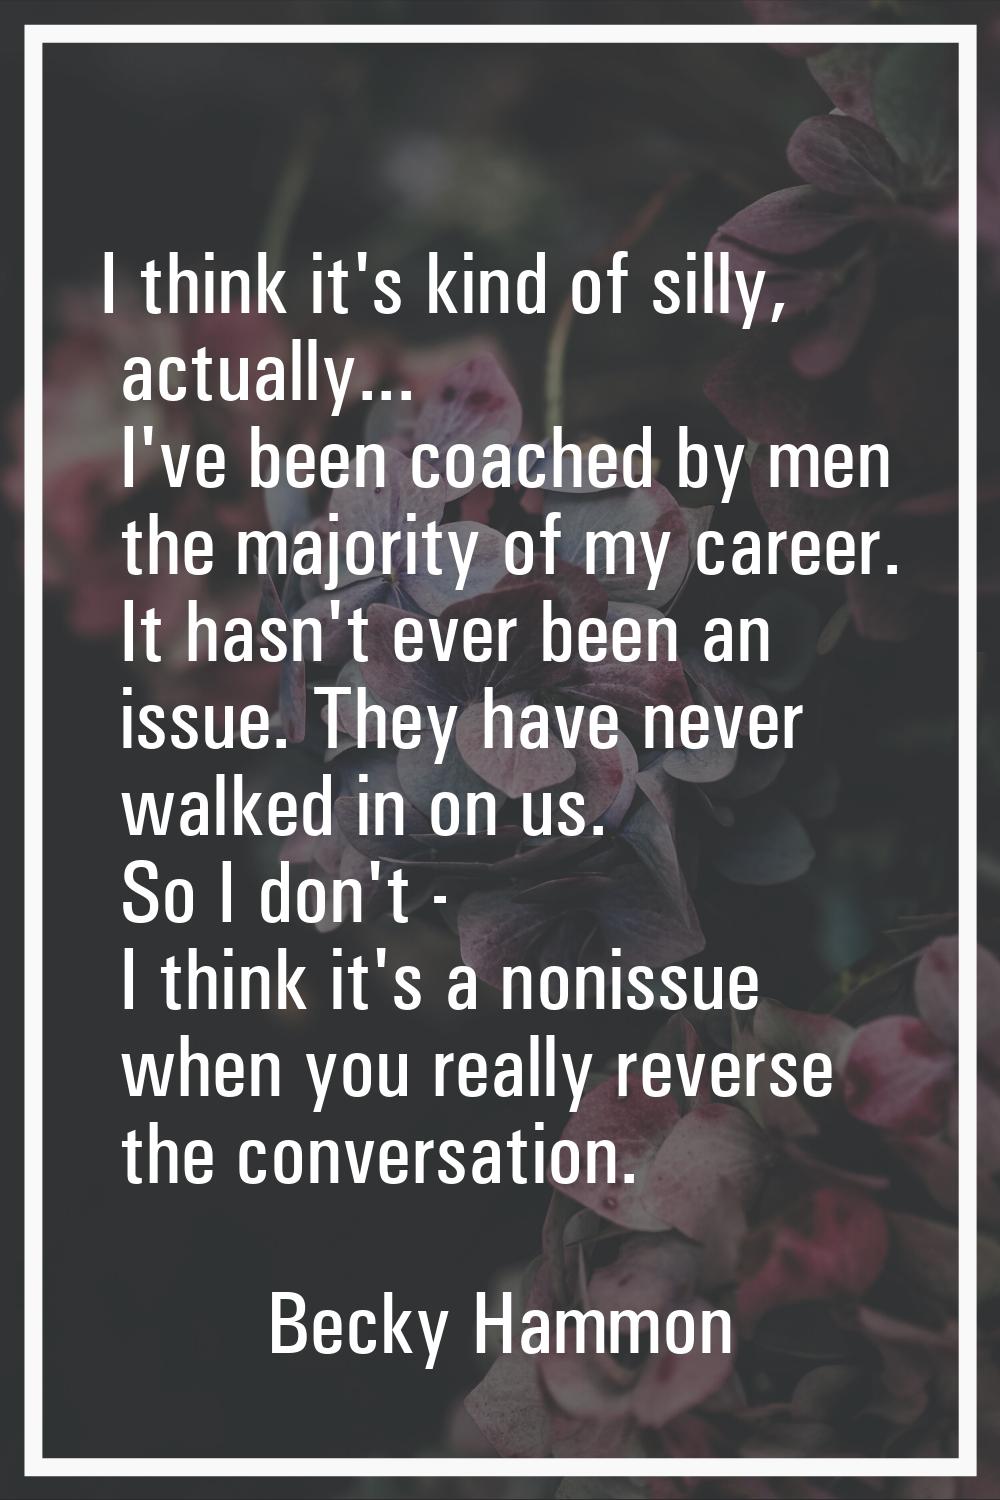 I think it's kind of silly, actually... I've been coached by men the majority of my career. It hasn